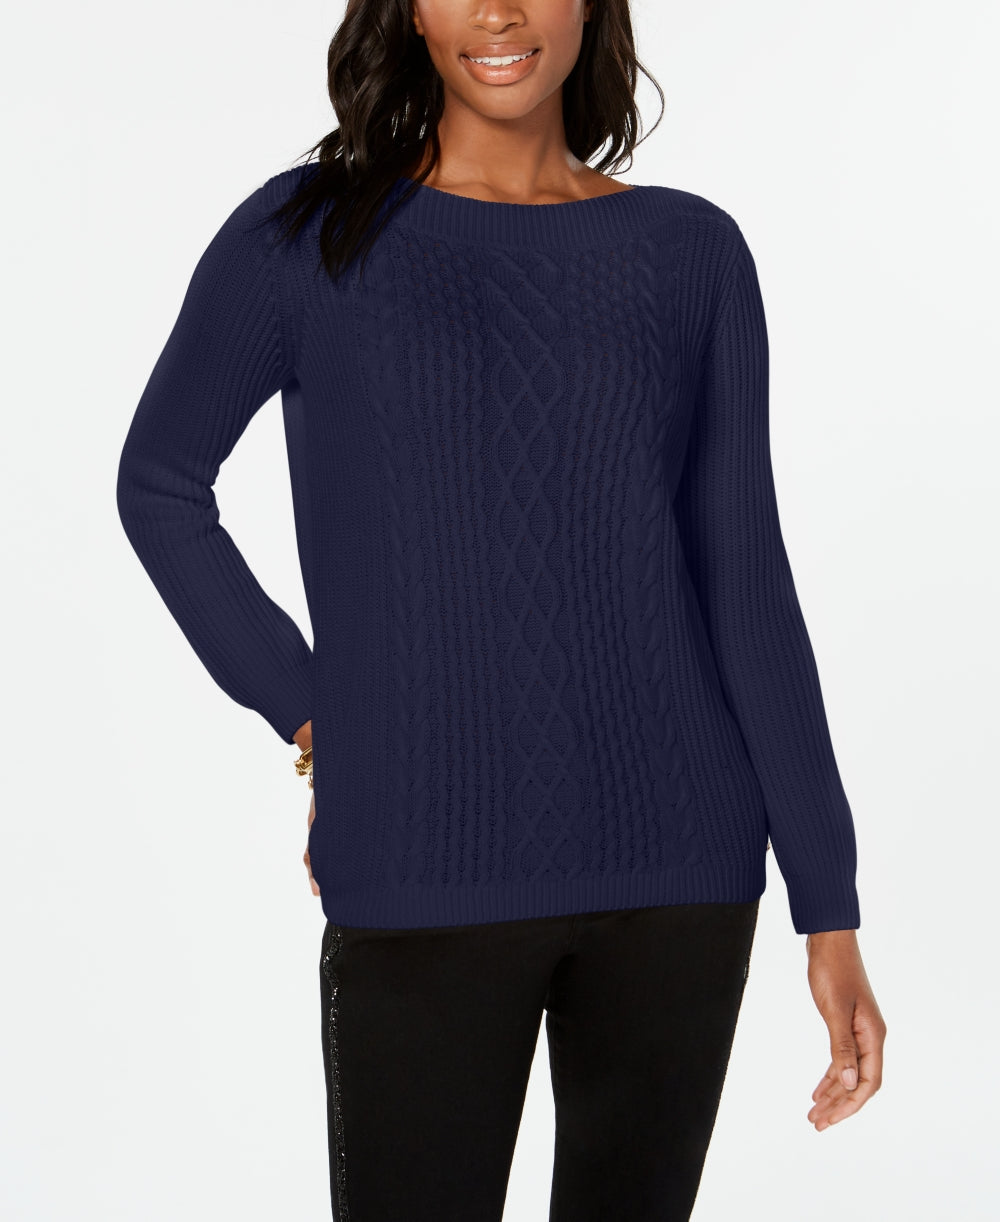 Tommy Hilfiger Womens Cable-Knit Sweater